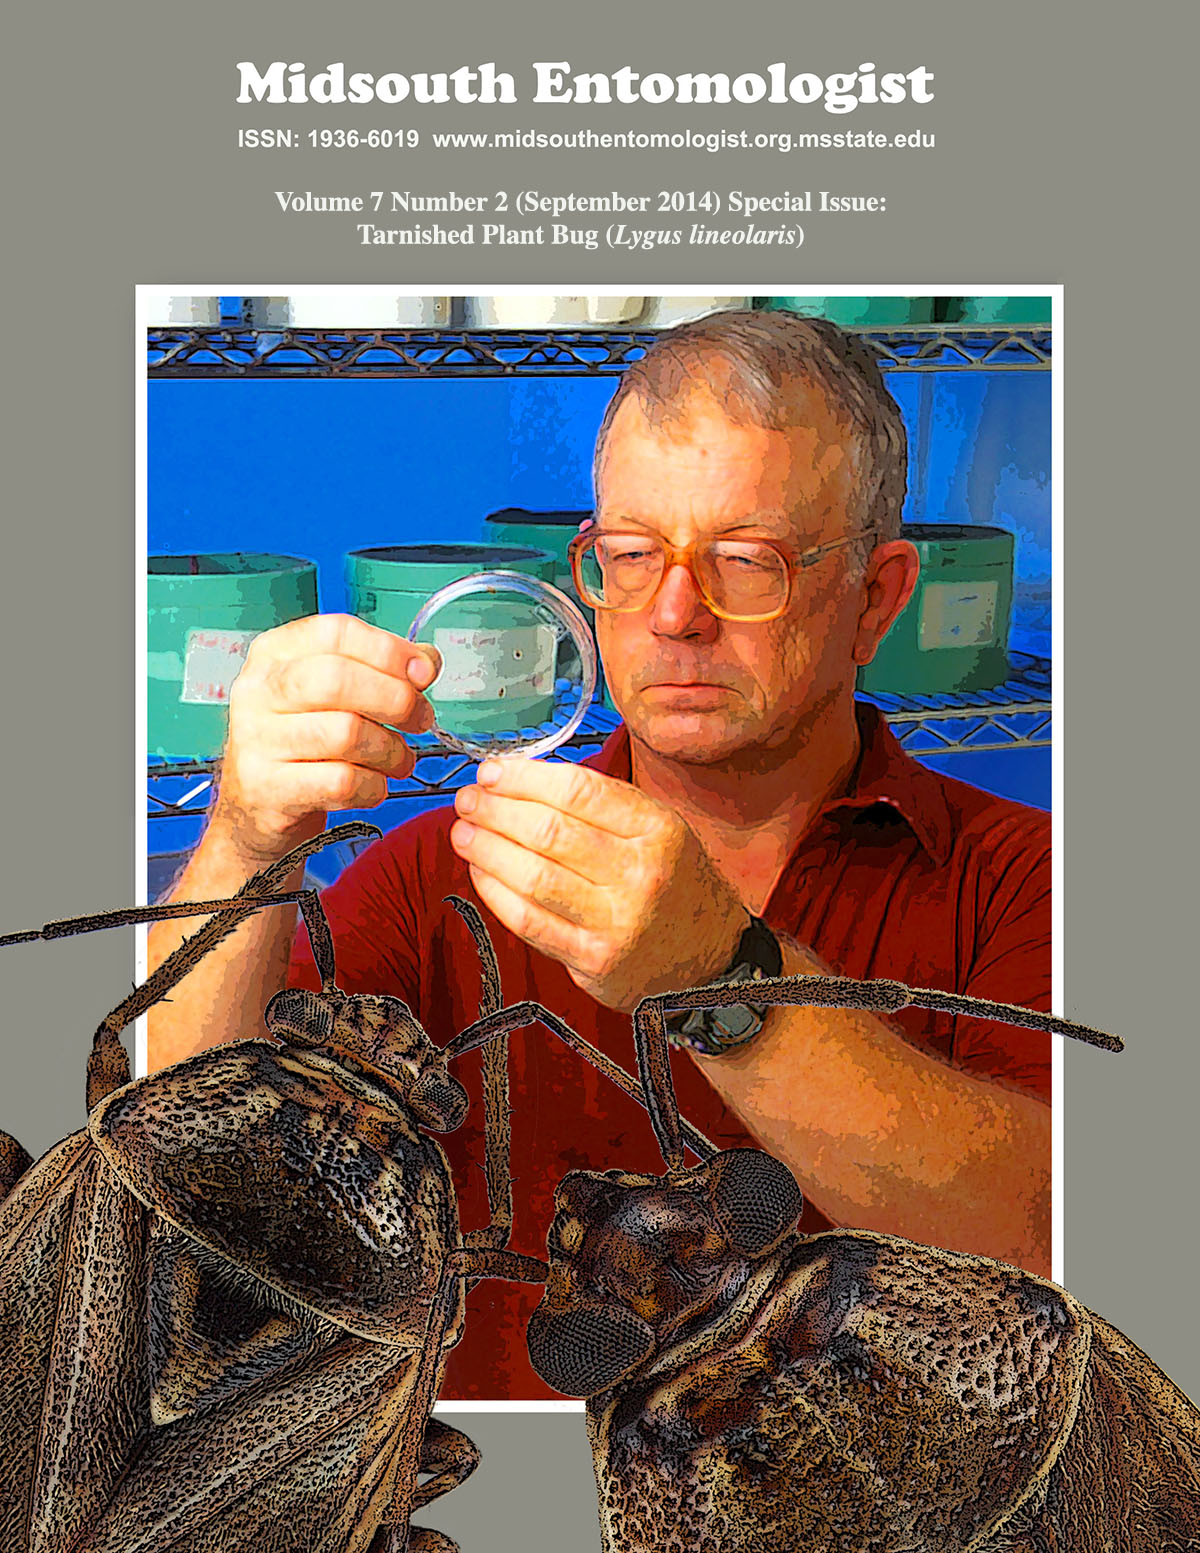 Volume 7 Number 2 (September 2014) Special Issue: Tarnished Plant Bug (Lygus lineolaris) - cover design by Joe A. MacGown